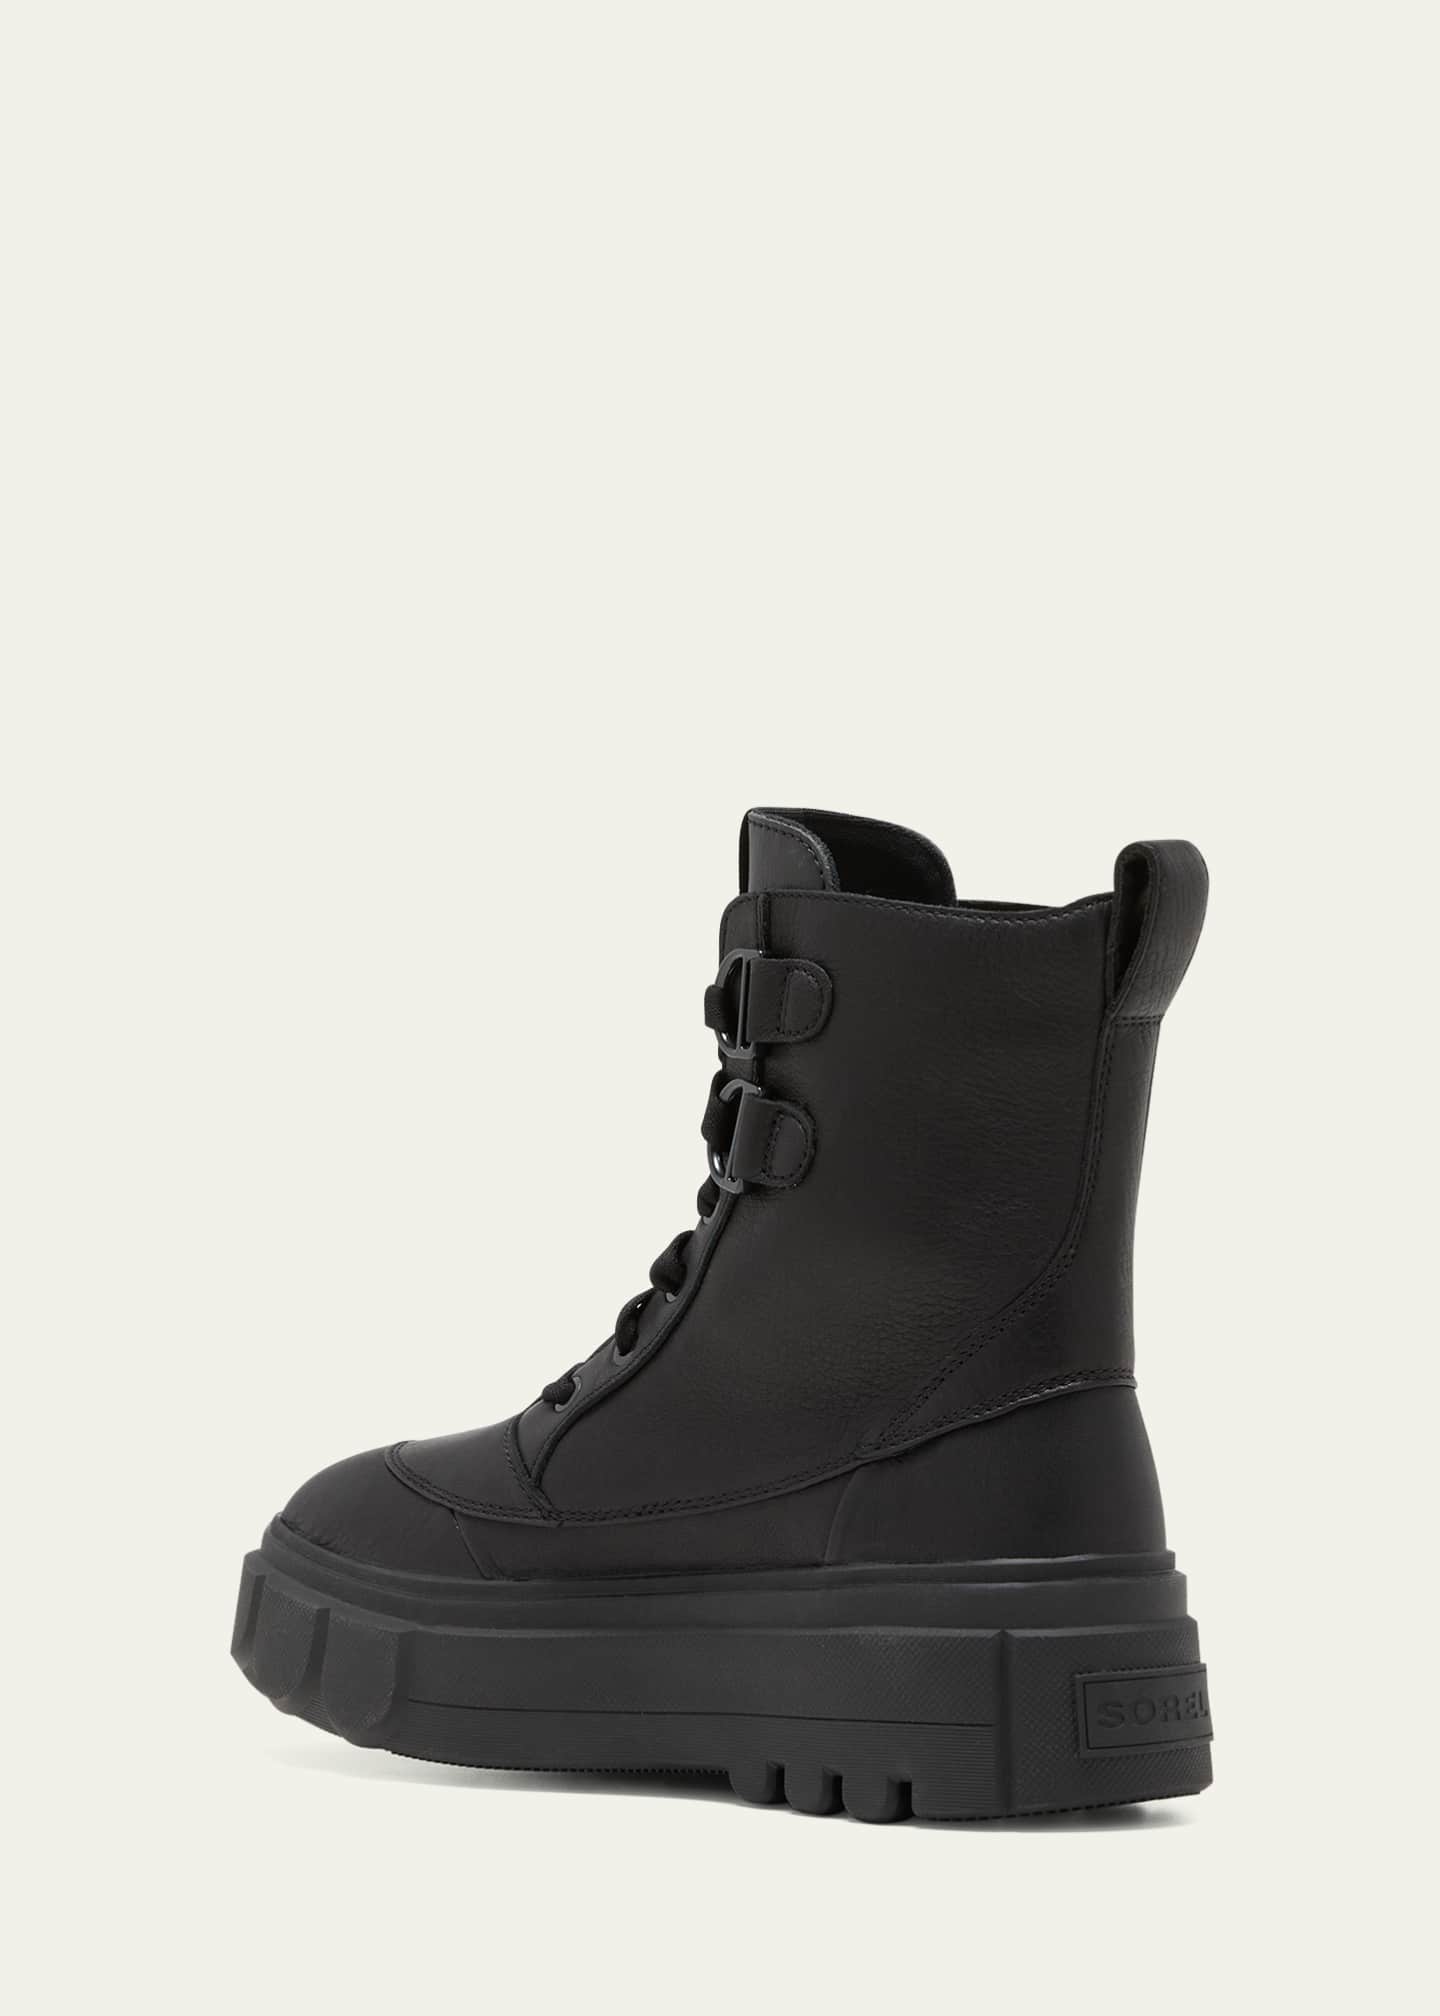 Sorel Caribou Leather Lace-Up Boots - Bergdorf Goodman